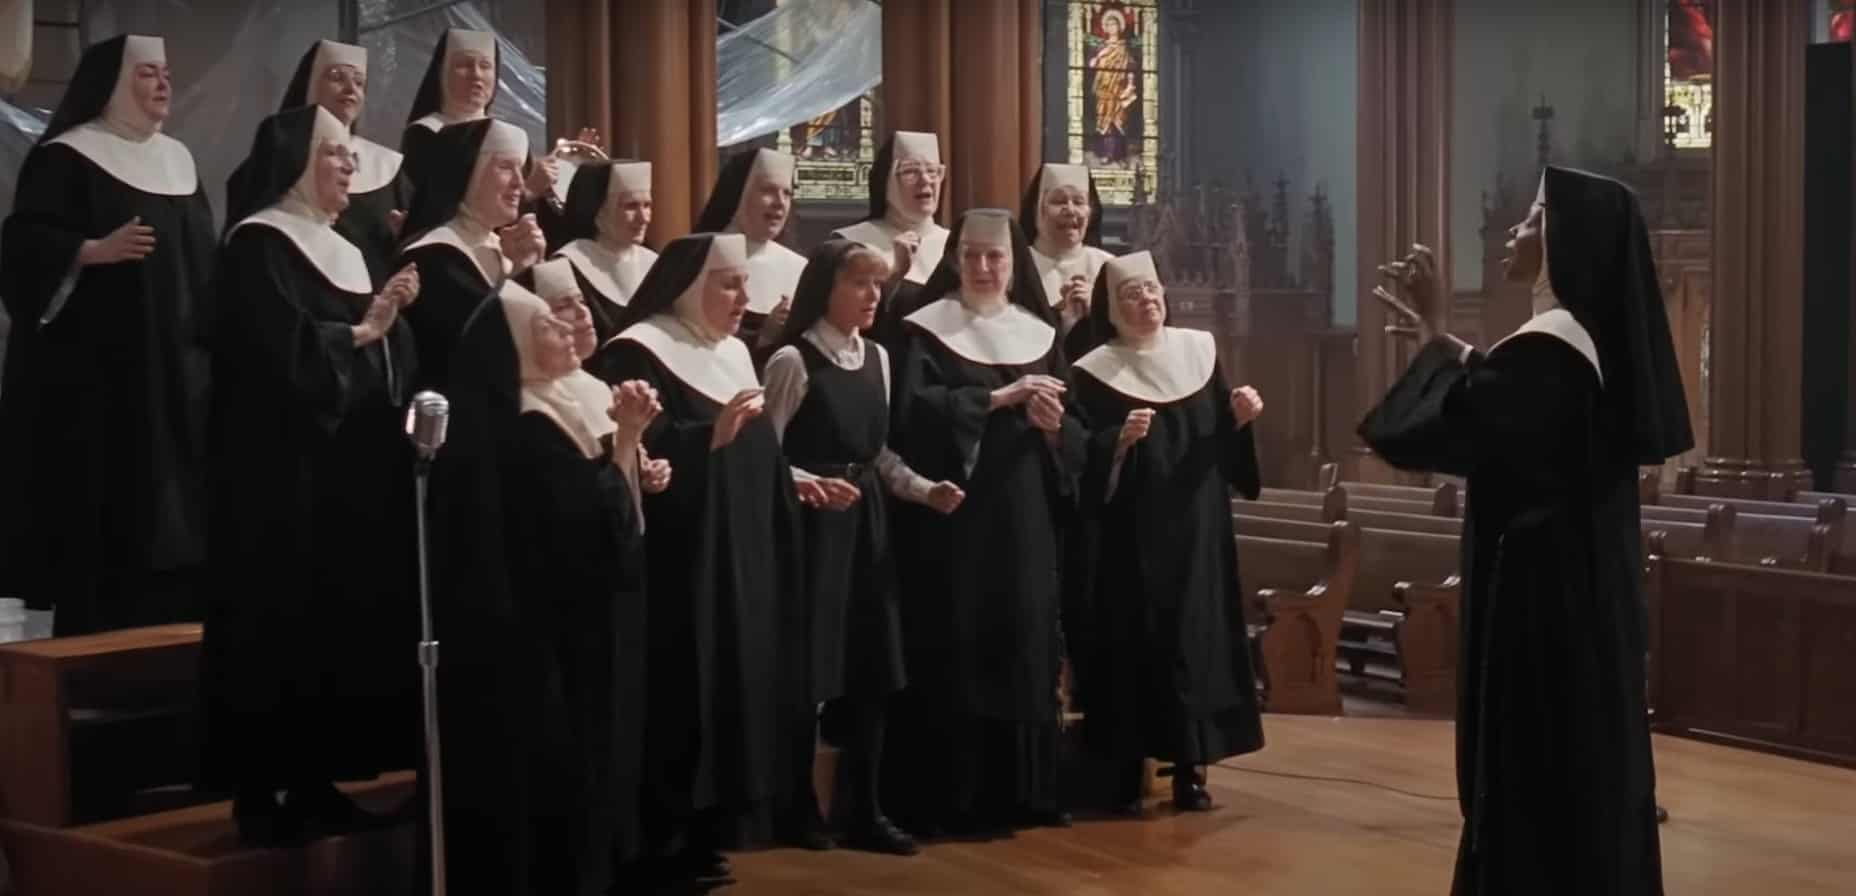 Sister Act filming locations